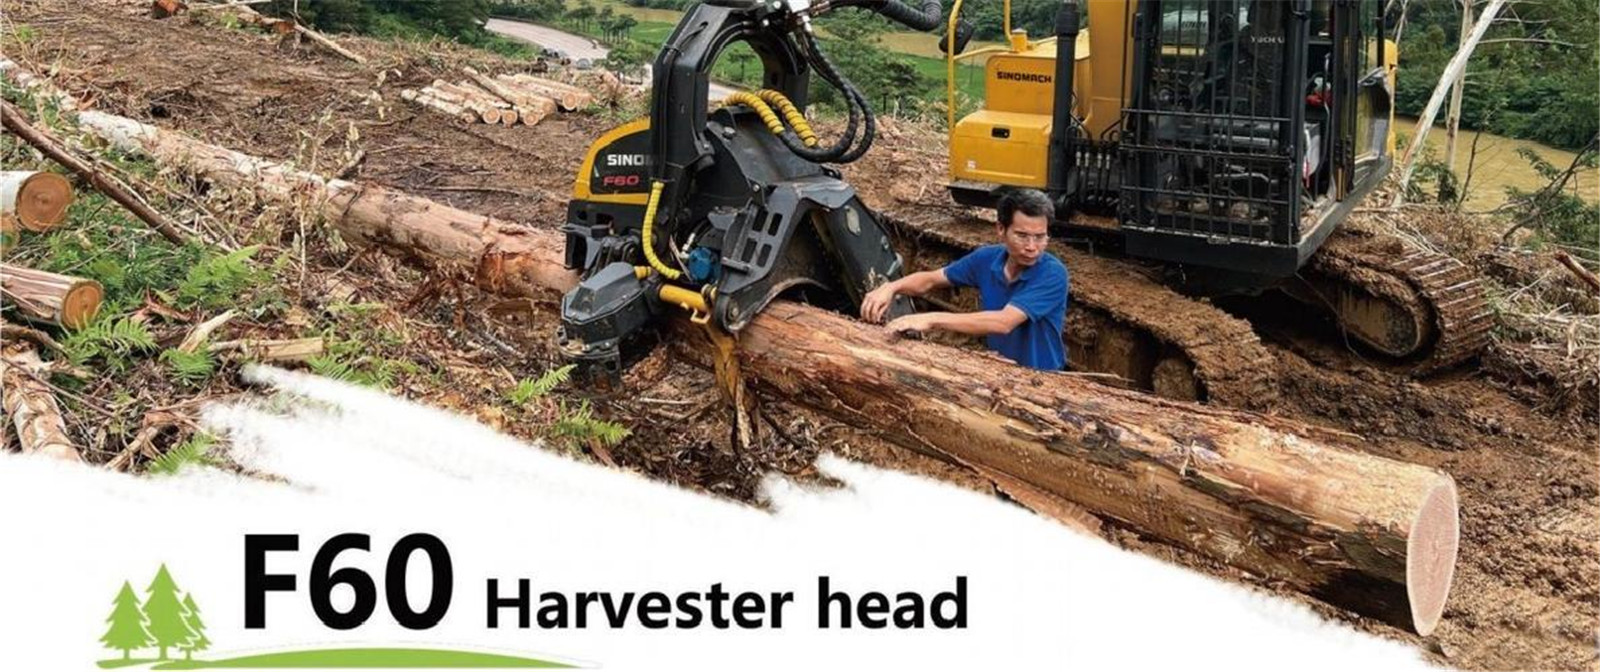 Upgrade Your Forestry Operations with SINOMACH's F40 Harvester Head (18)ur0